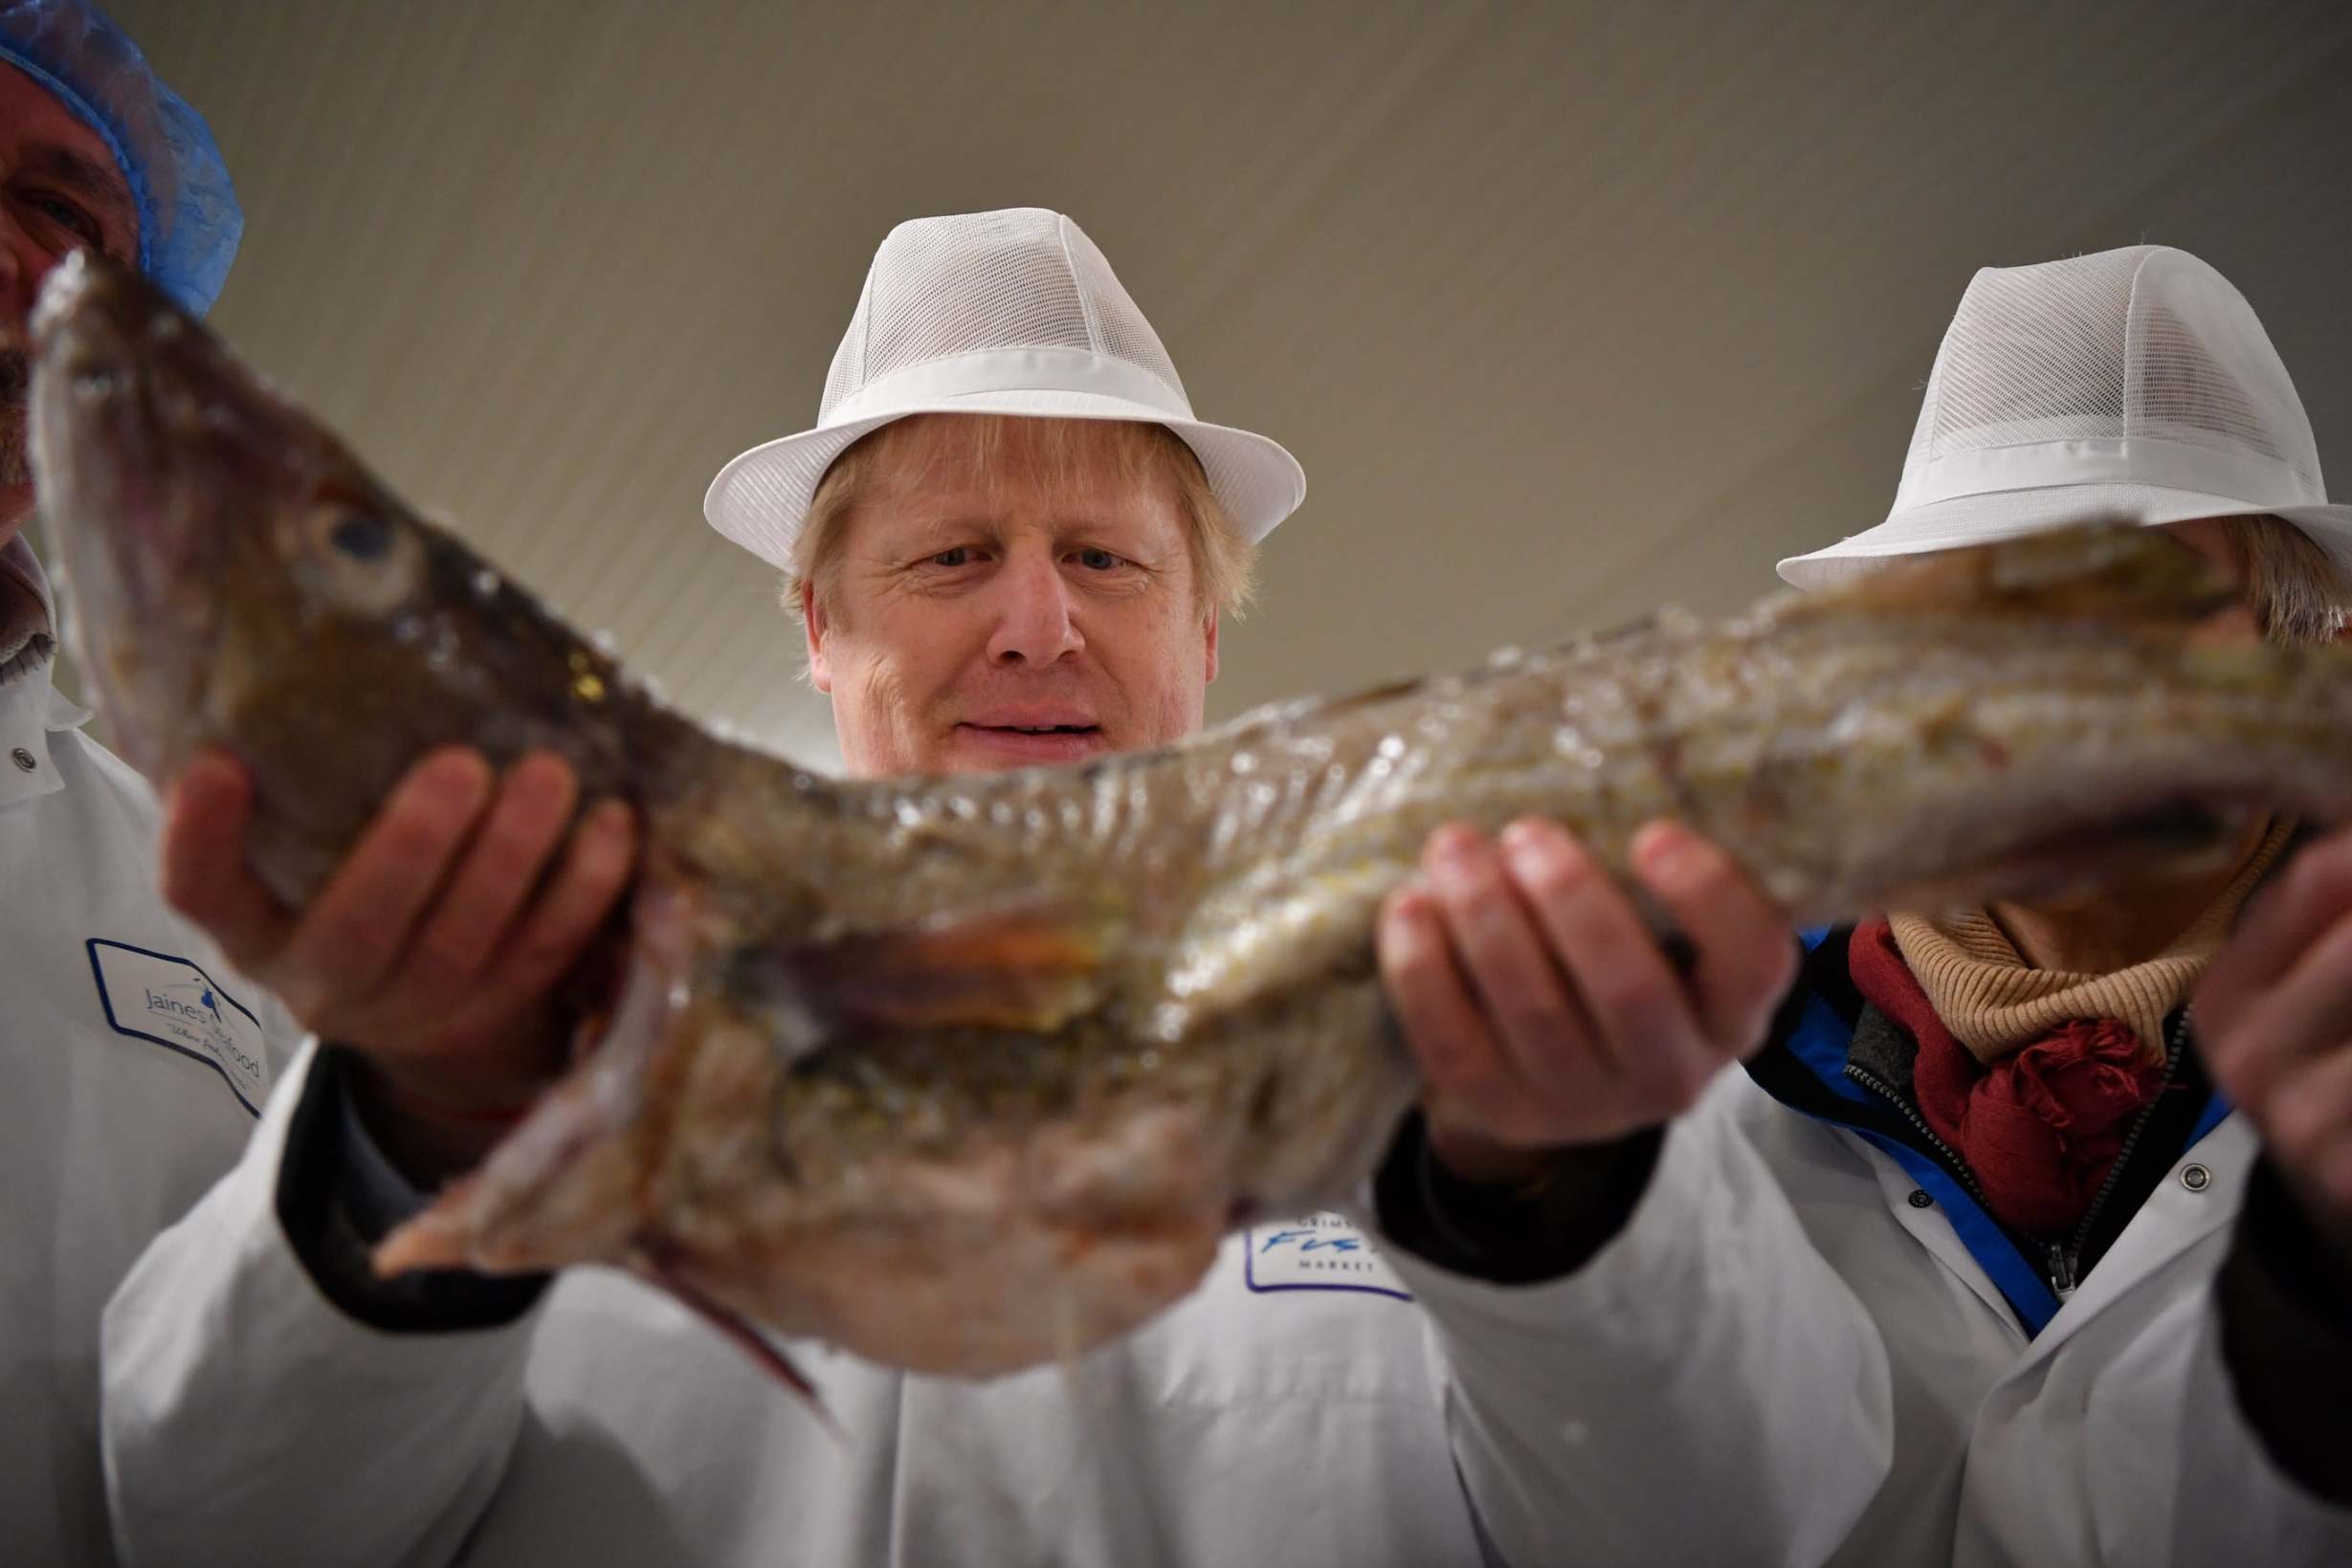 ‘Didn’t they spend all of 2019 negotiating about fish before finally, and dramatically sorting it all out?’